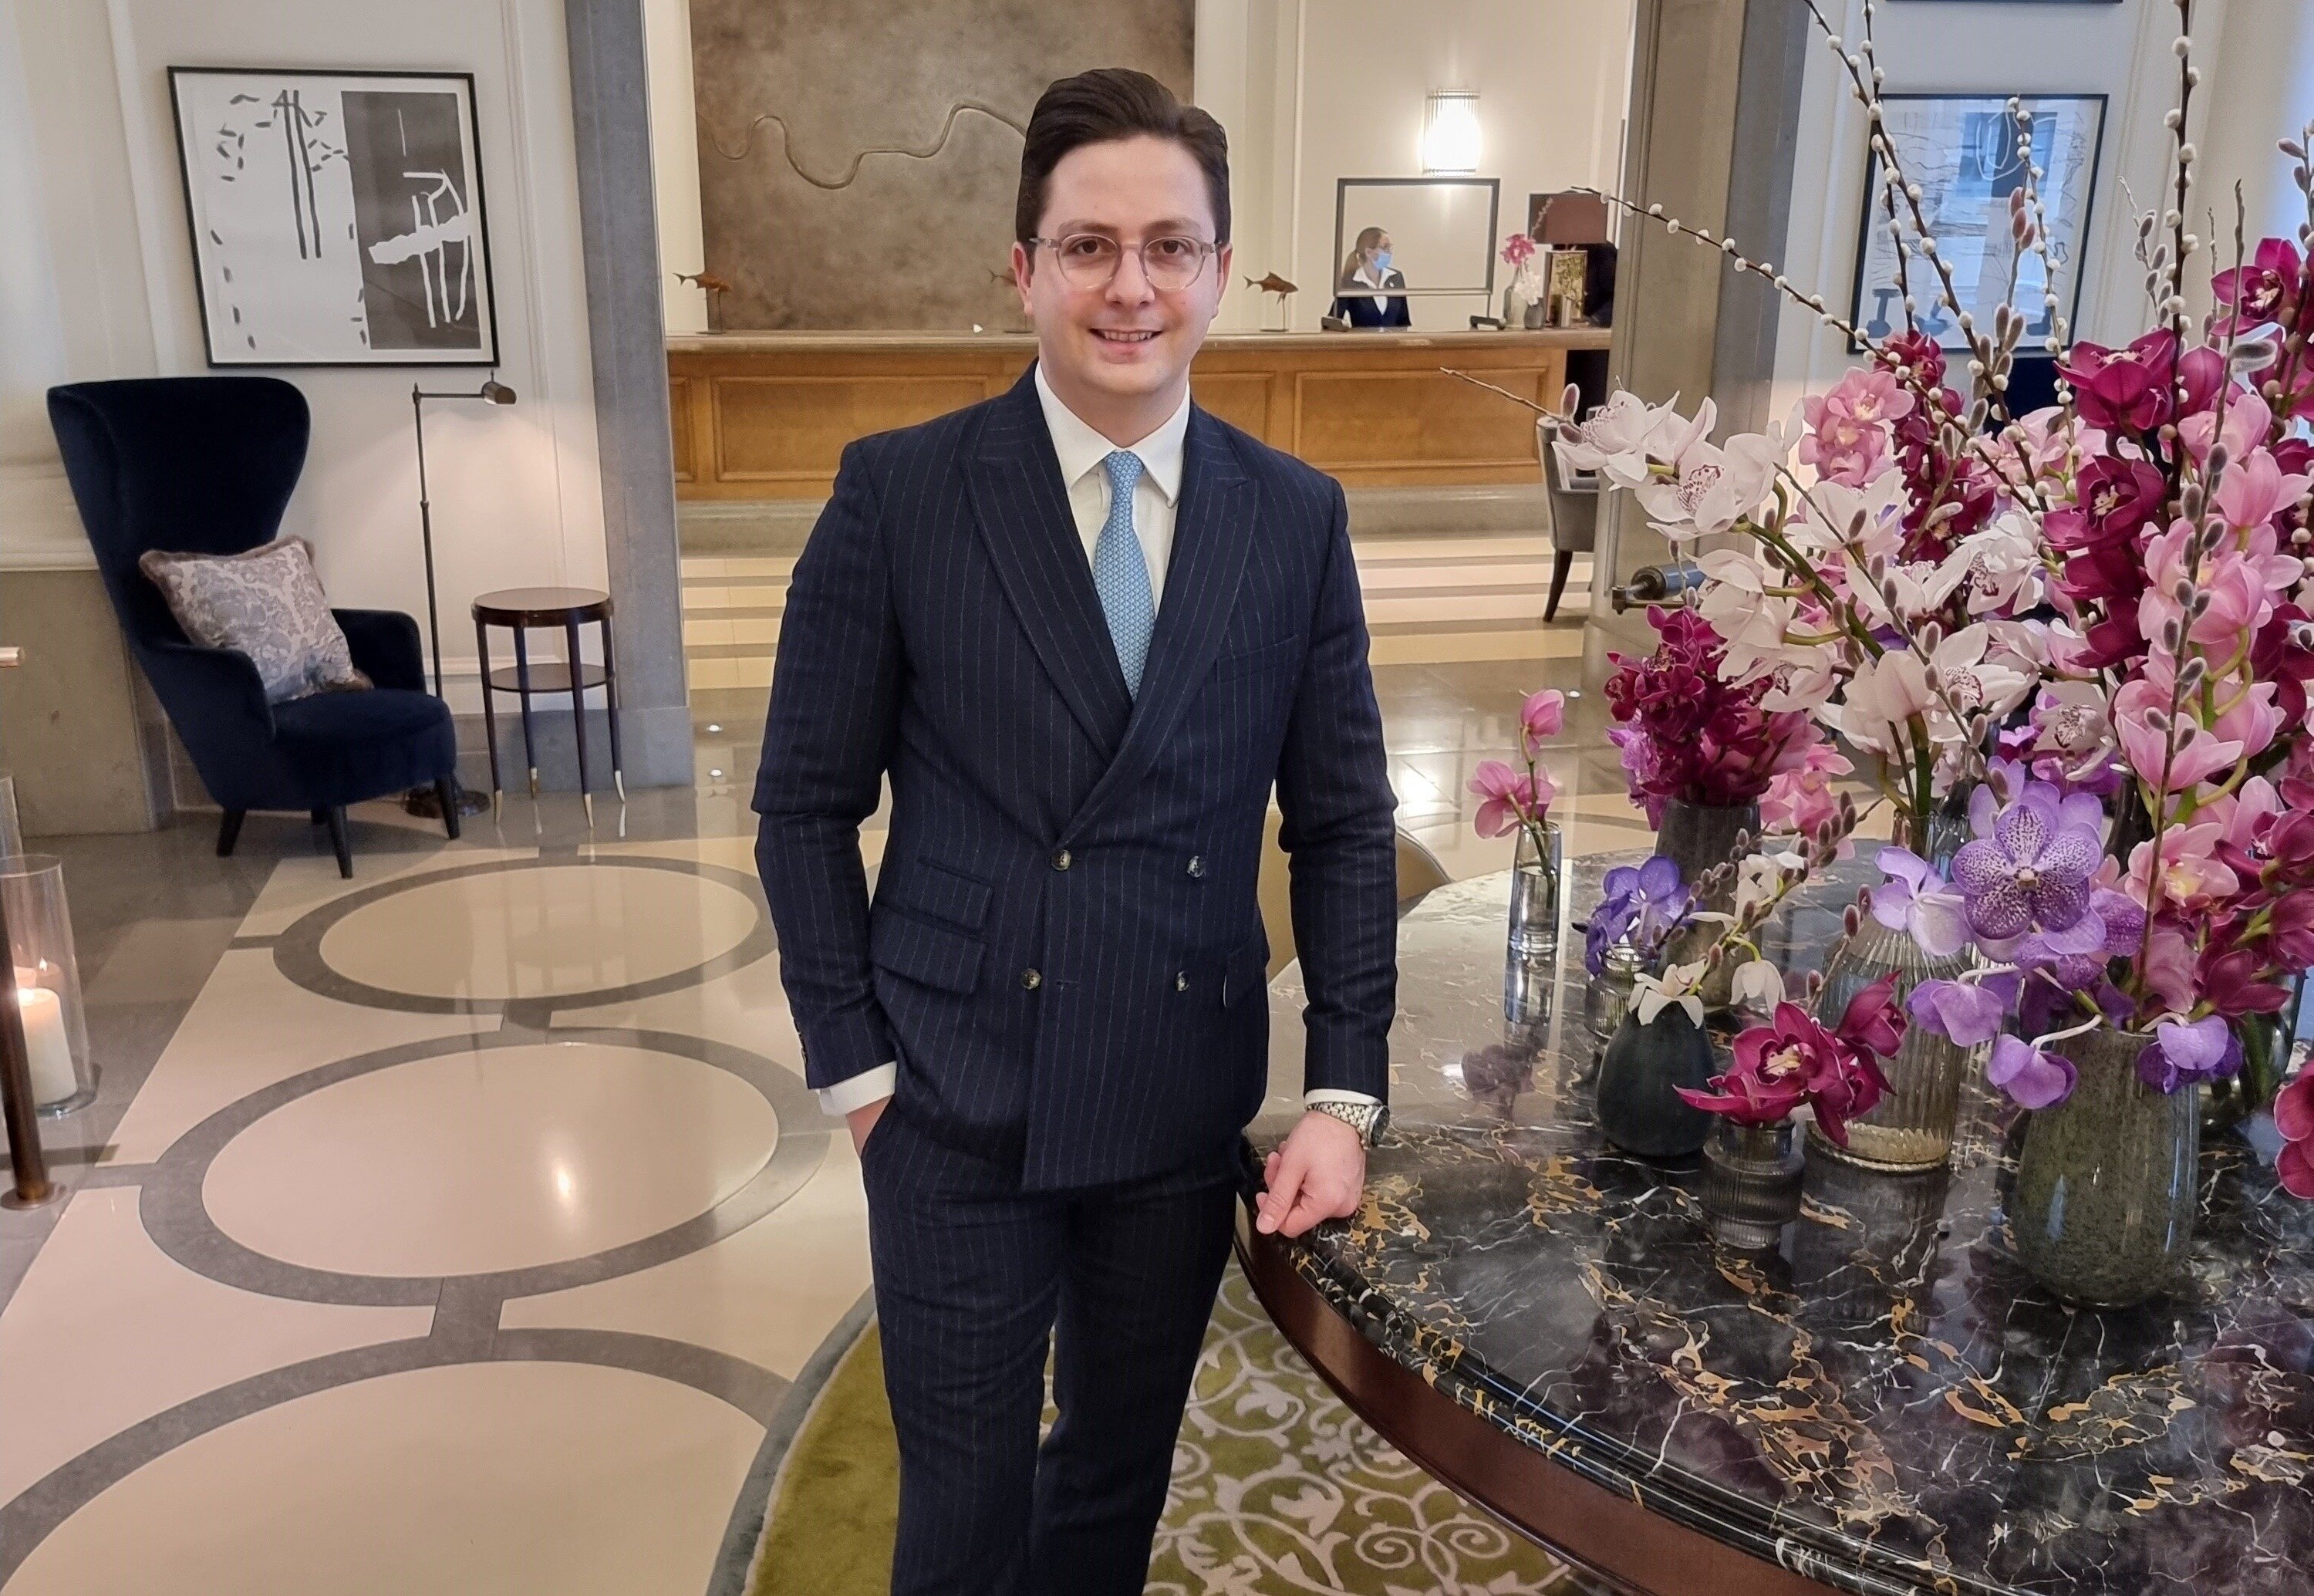 Gold Service Scholar promoted to director of food and beverage at Corinthia London